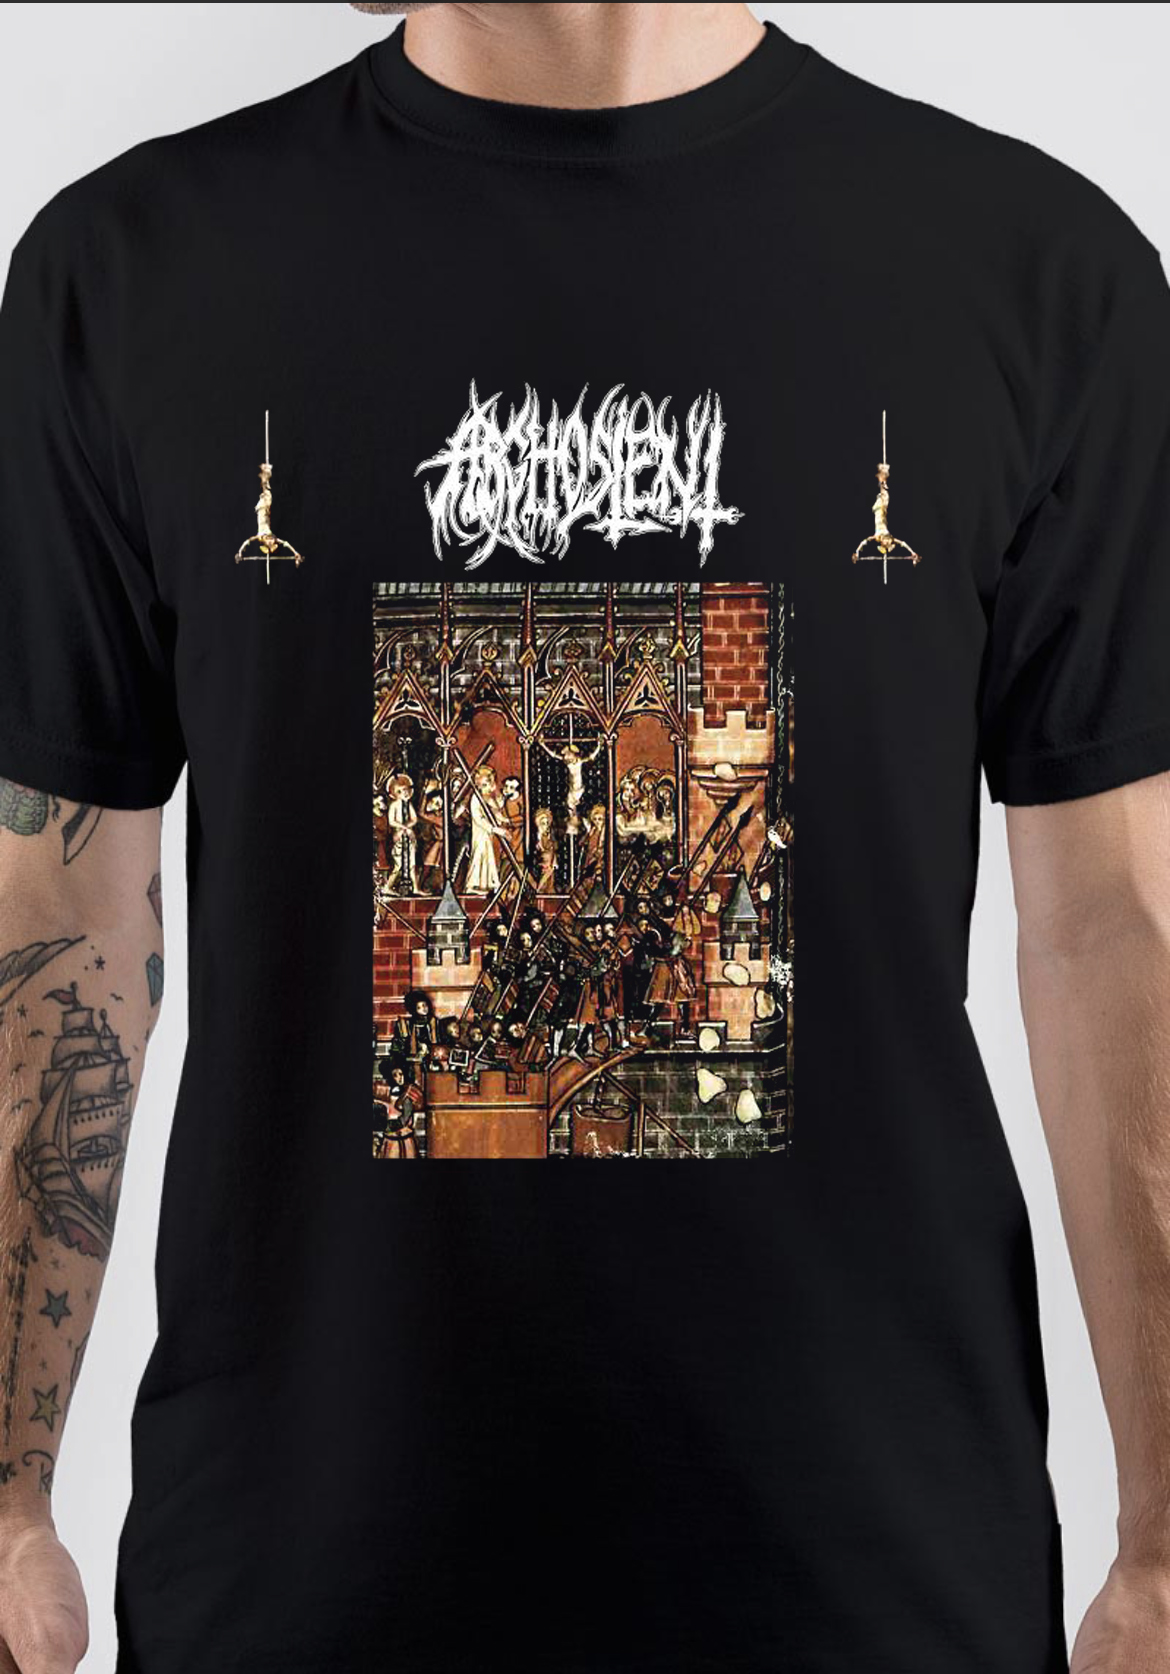 Arghoslent T-Shirt And Merchandise